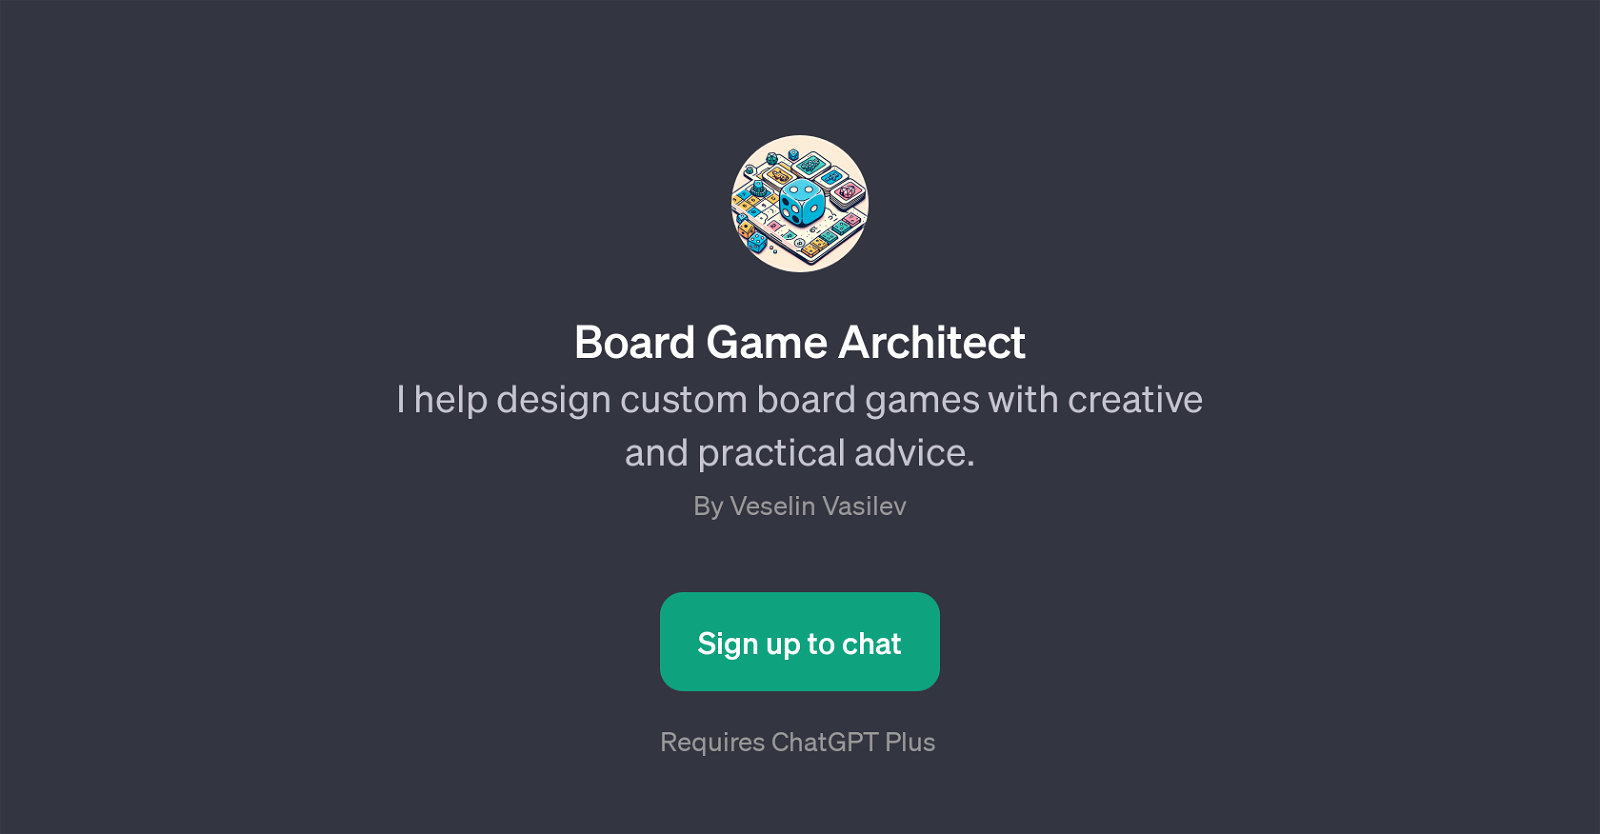 Board Game Architect website